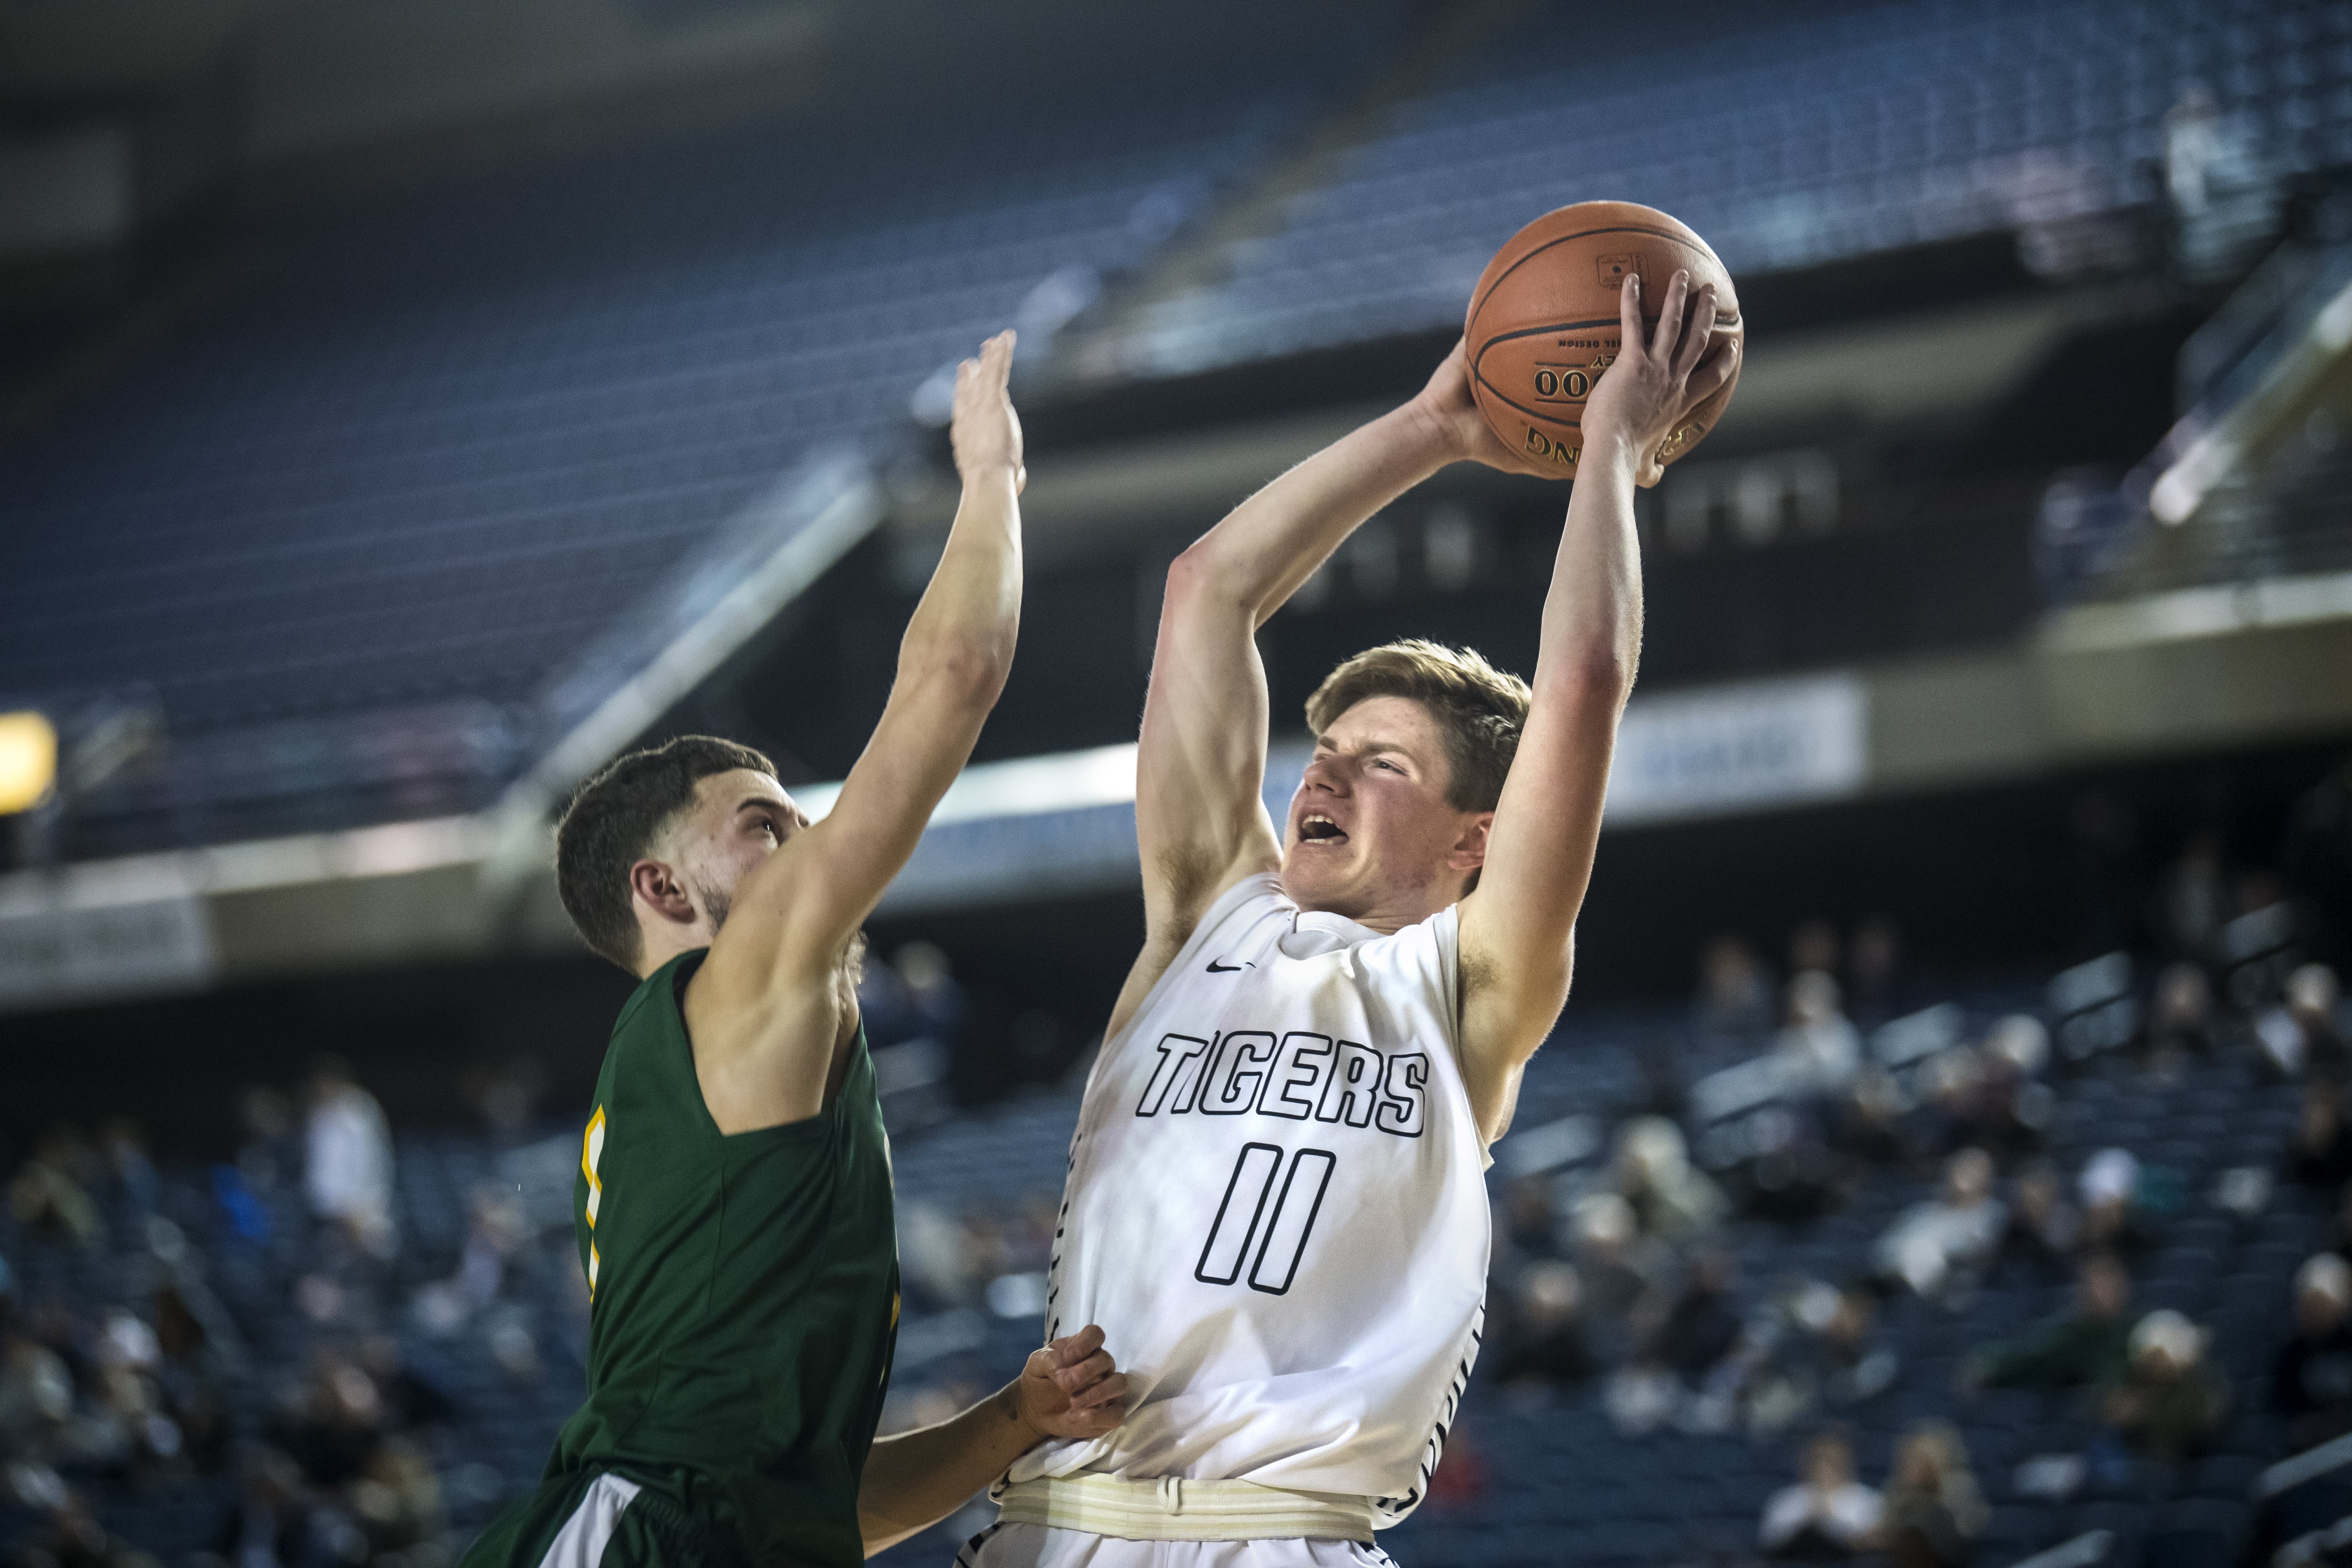 Battle Ground's Nathan Millspaugh is blocked by a Kentridge defender during the 4A Hardwood Classic at the Tacoma Dome on Wednesday, Feb. 27, 2019.